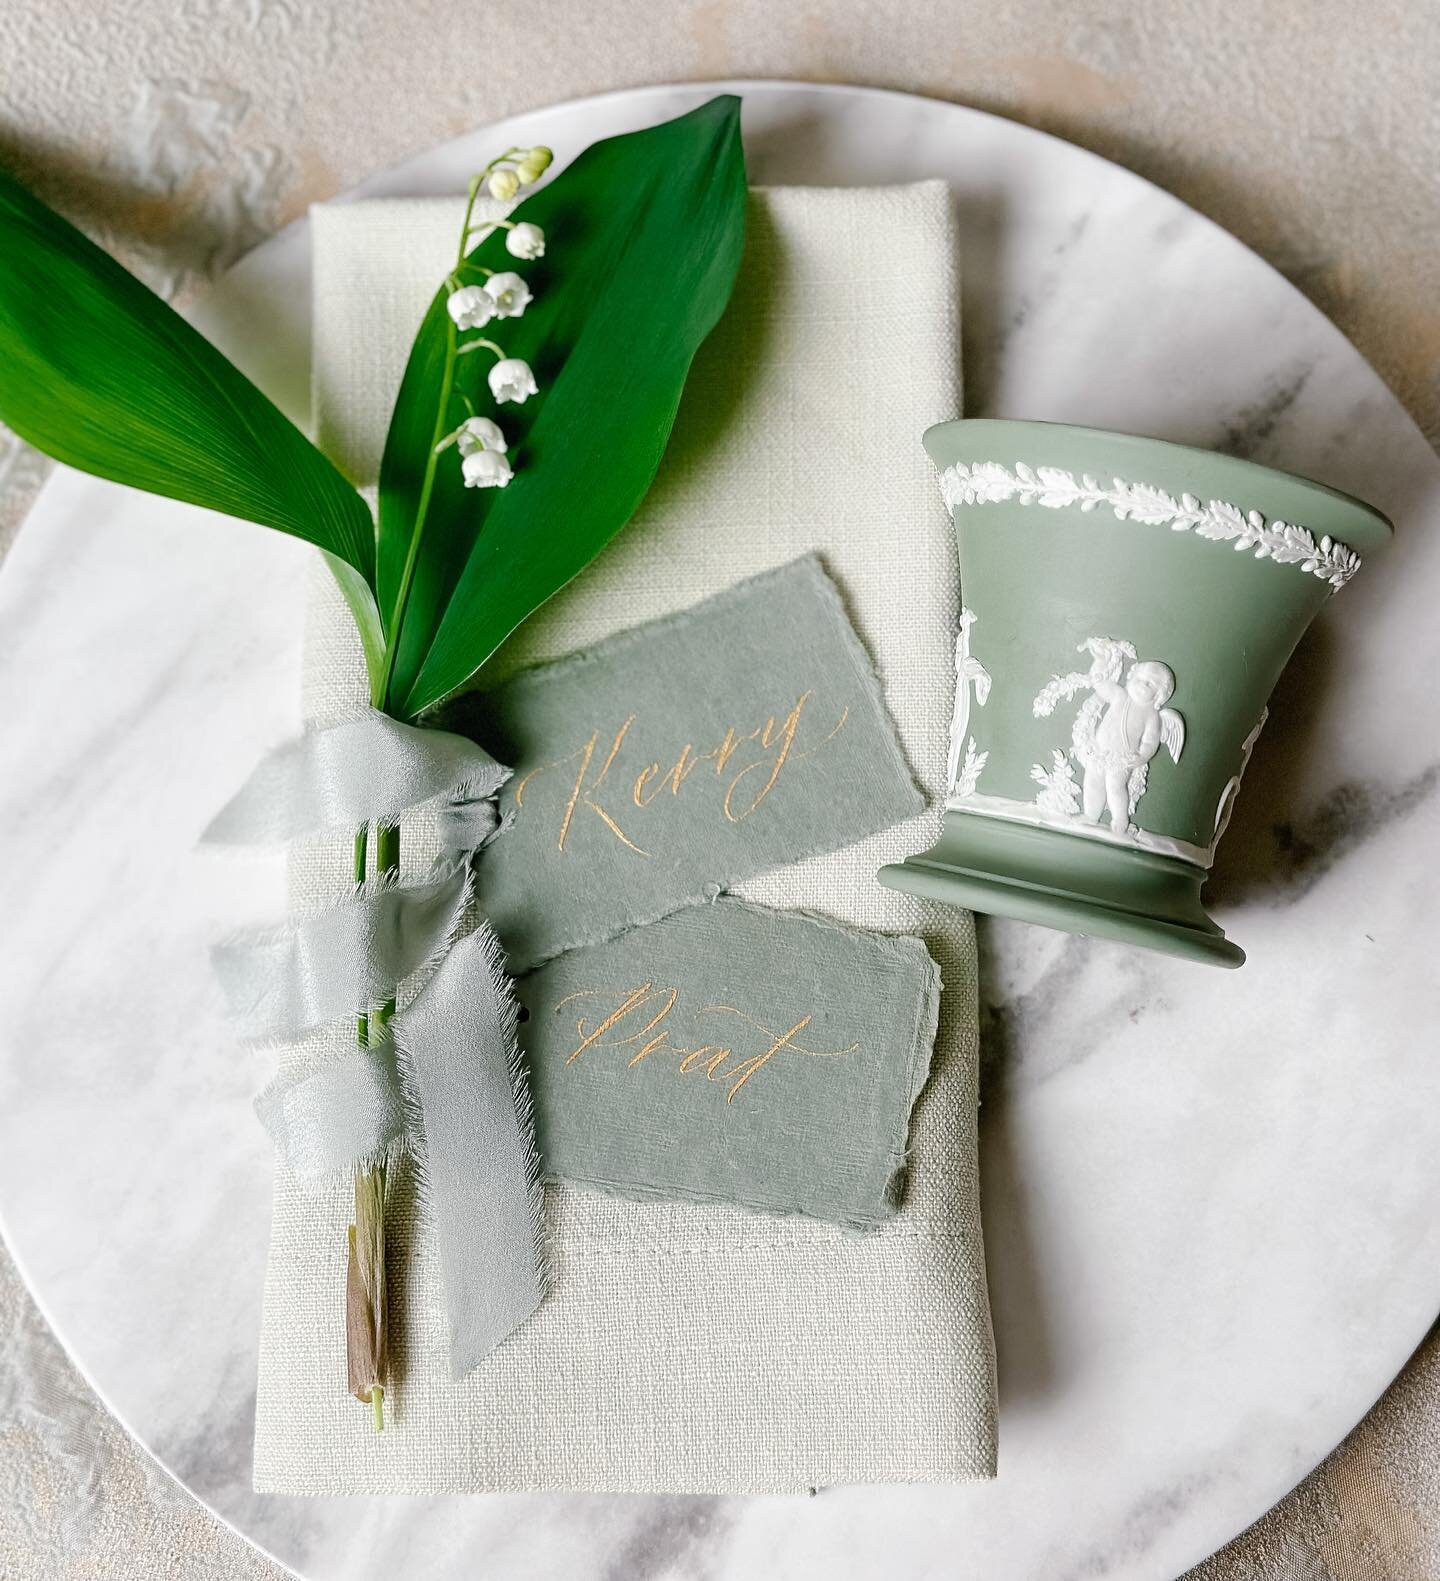 Happy Anniversary to my friends @kerrypatelfloral and Prat! My love affair with handmade paper and silk ribbon ties continue. These little place cards may look simple but when layered onto your table, can add so much texture. Don&rsquo;t you agree? M